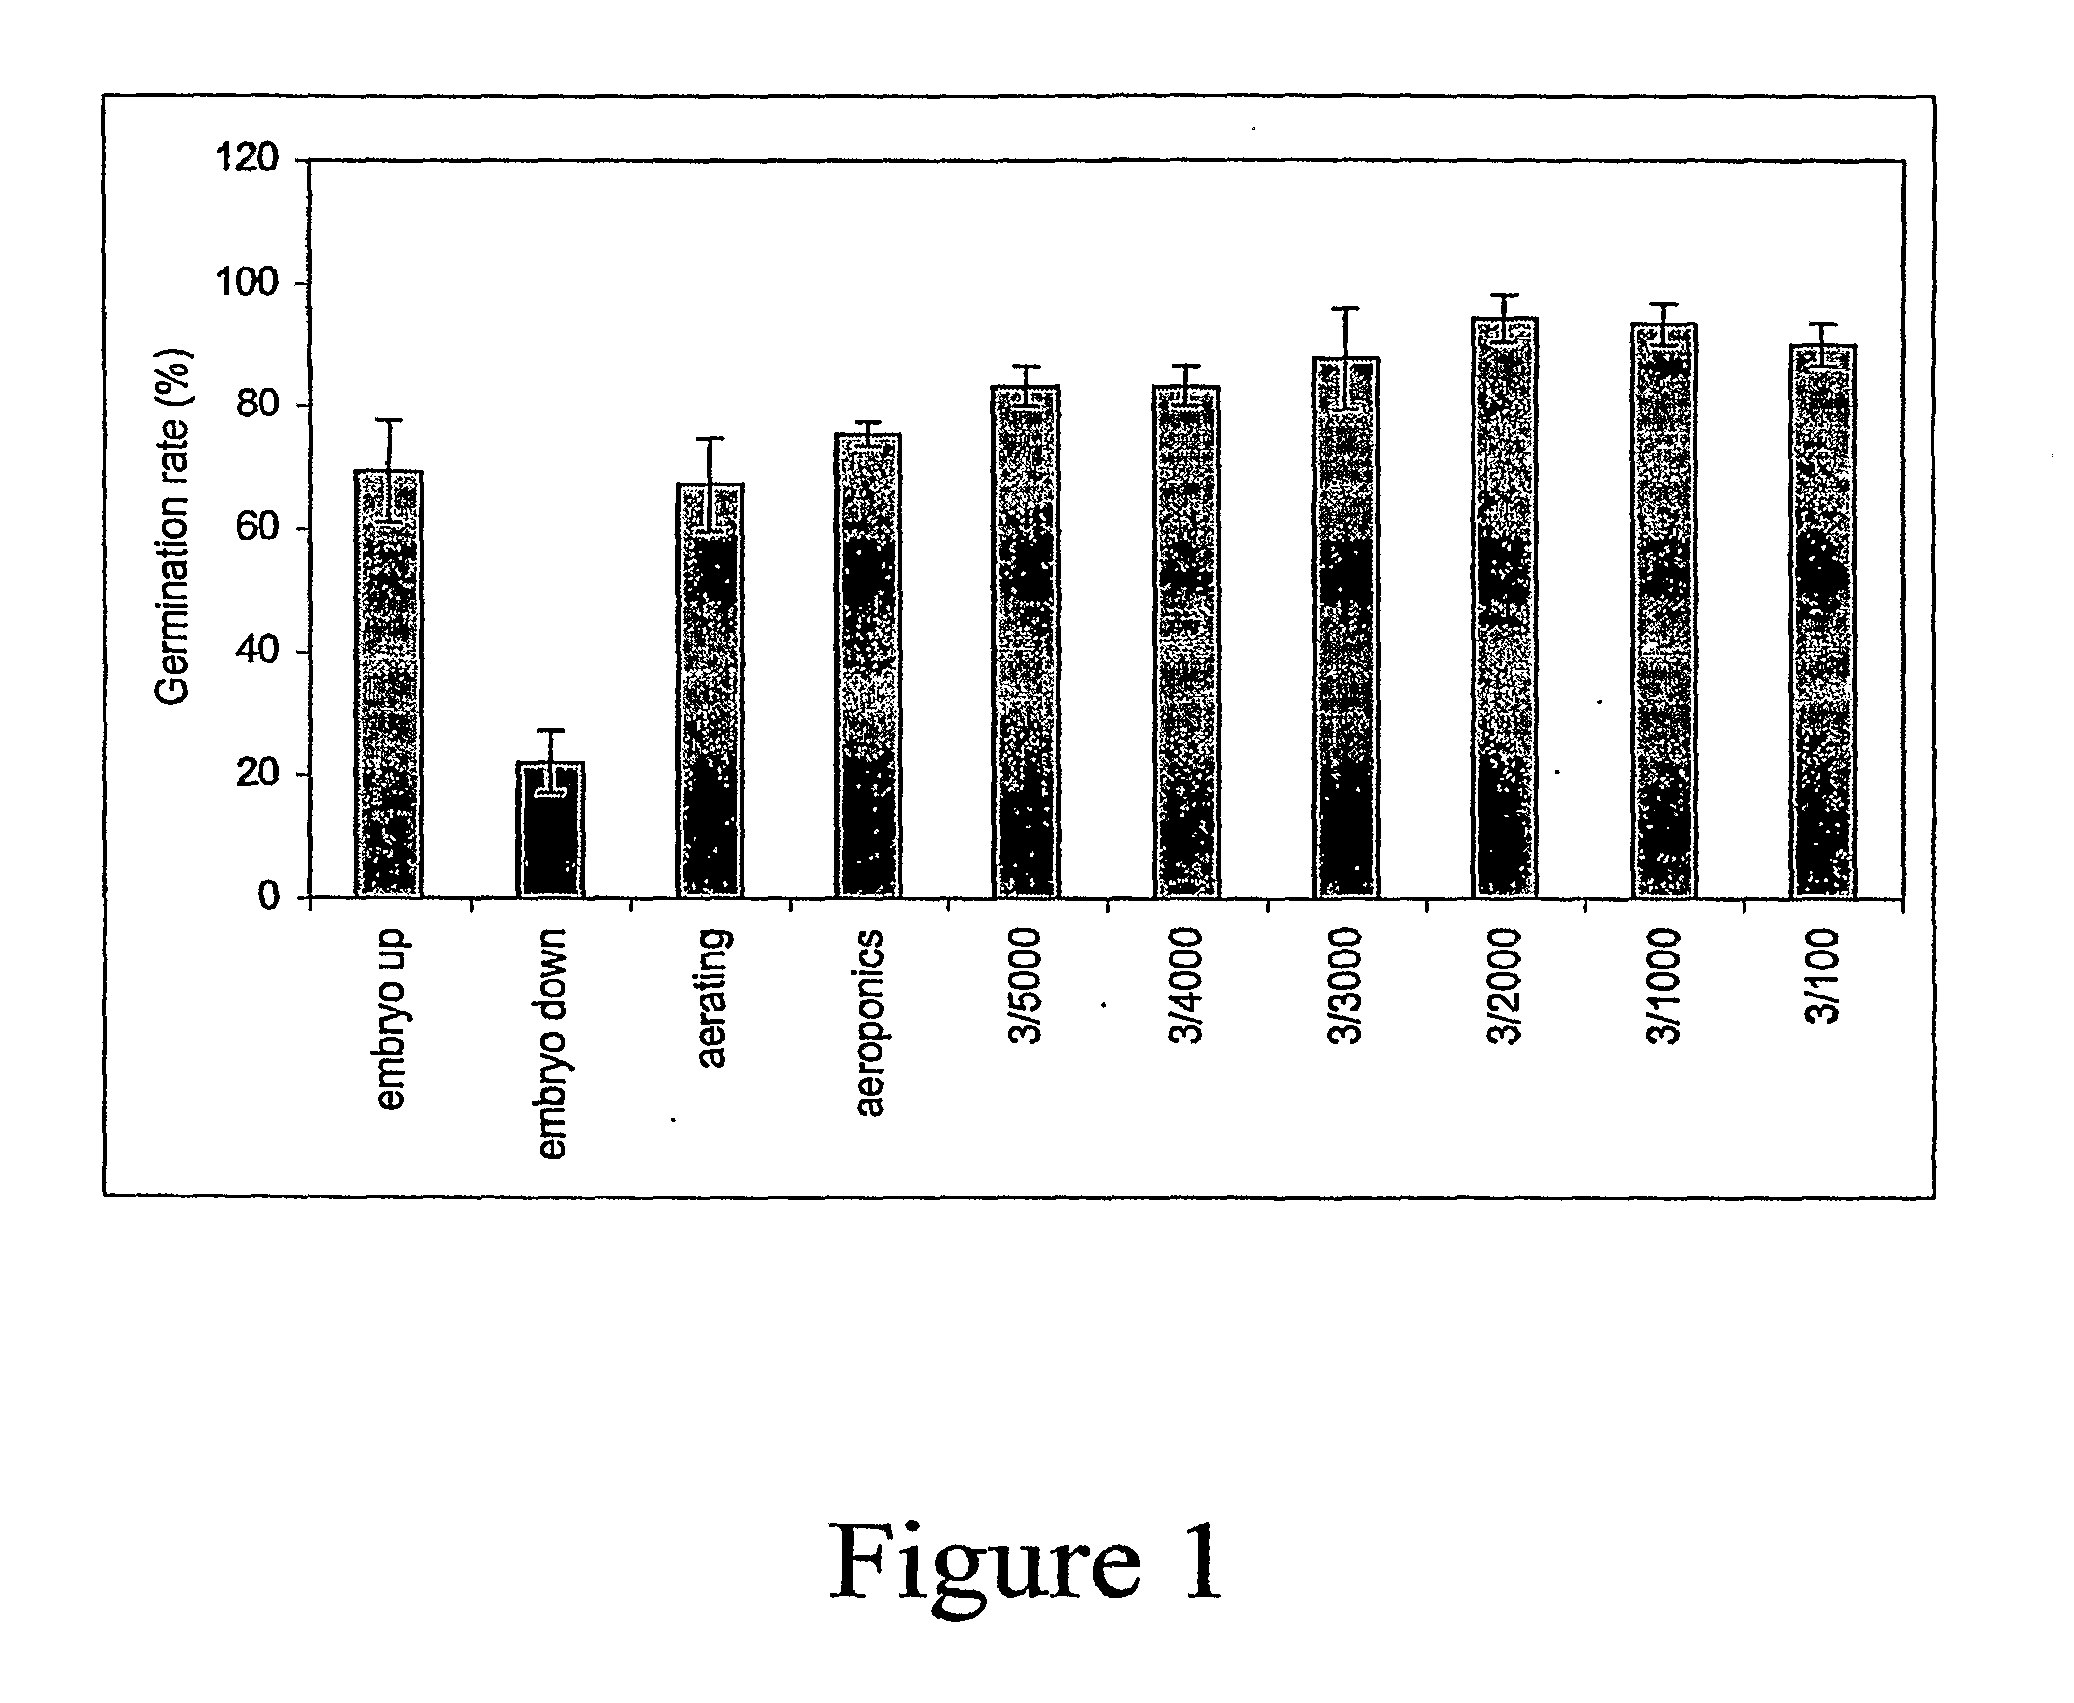 Materials and Methods for Providing Oxygen to Improve Seed Germination and Plant Growth